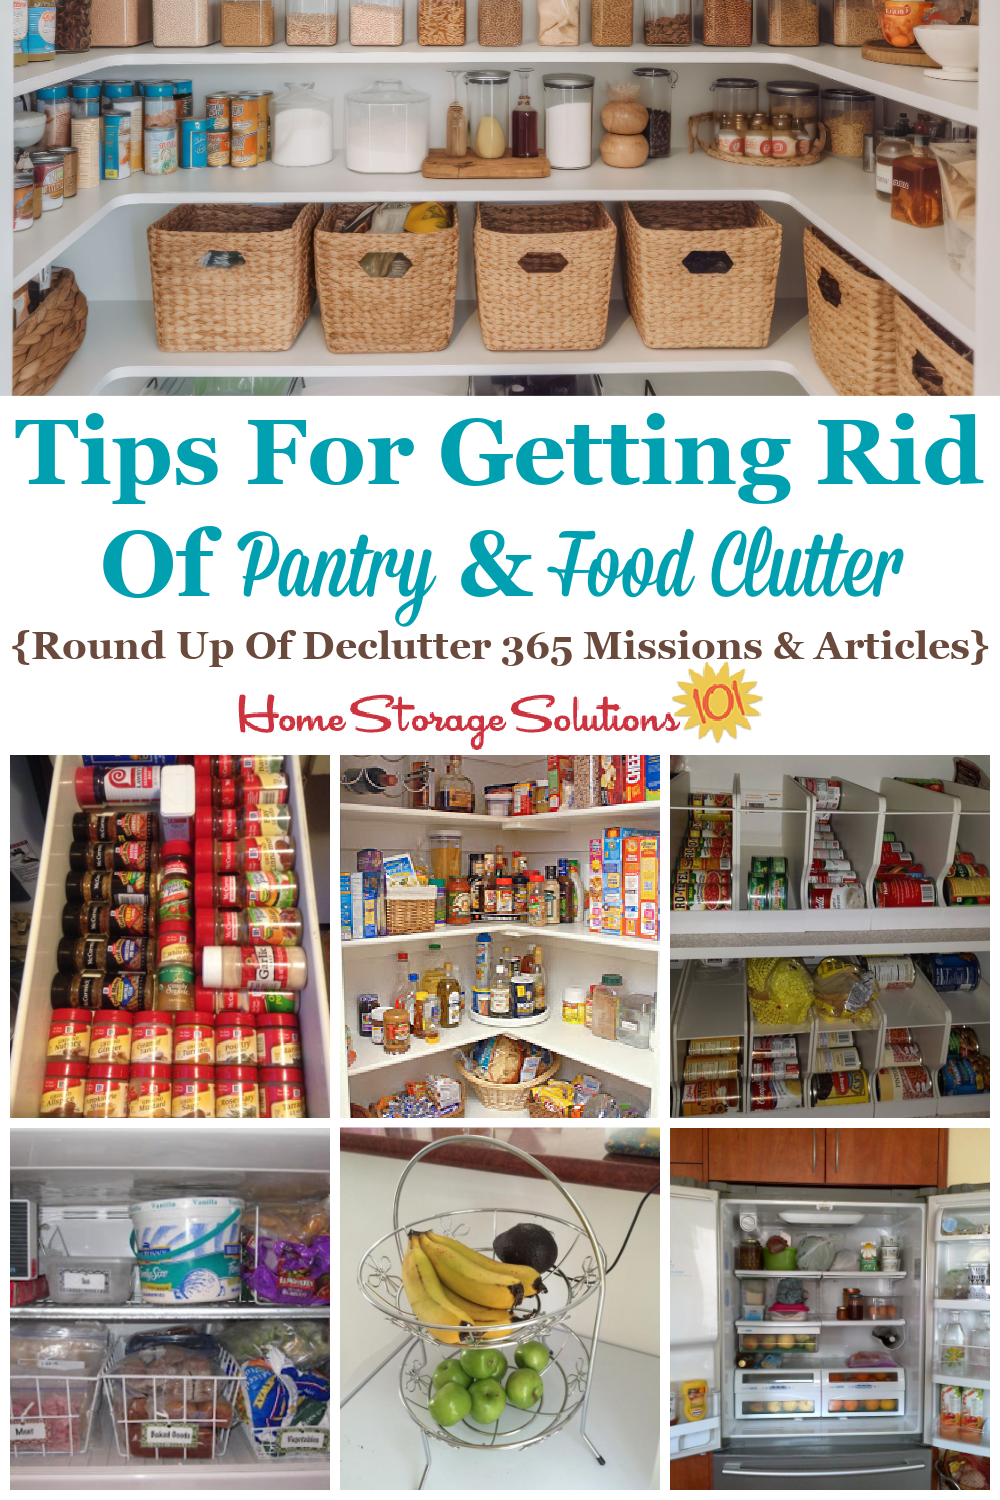 Here is a checklist of pantry and food clutter items to consider getting rid of, plus a round up of Declutter 365 missions and articles to help you accomplish these tasks {on Home Storage Solutions 101} #Declutter365 #PantryClutter #DeclutterPantry